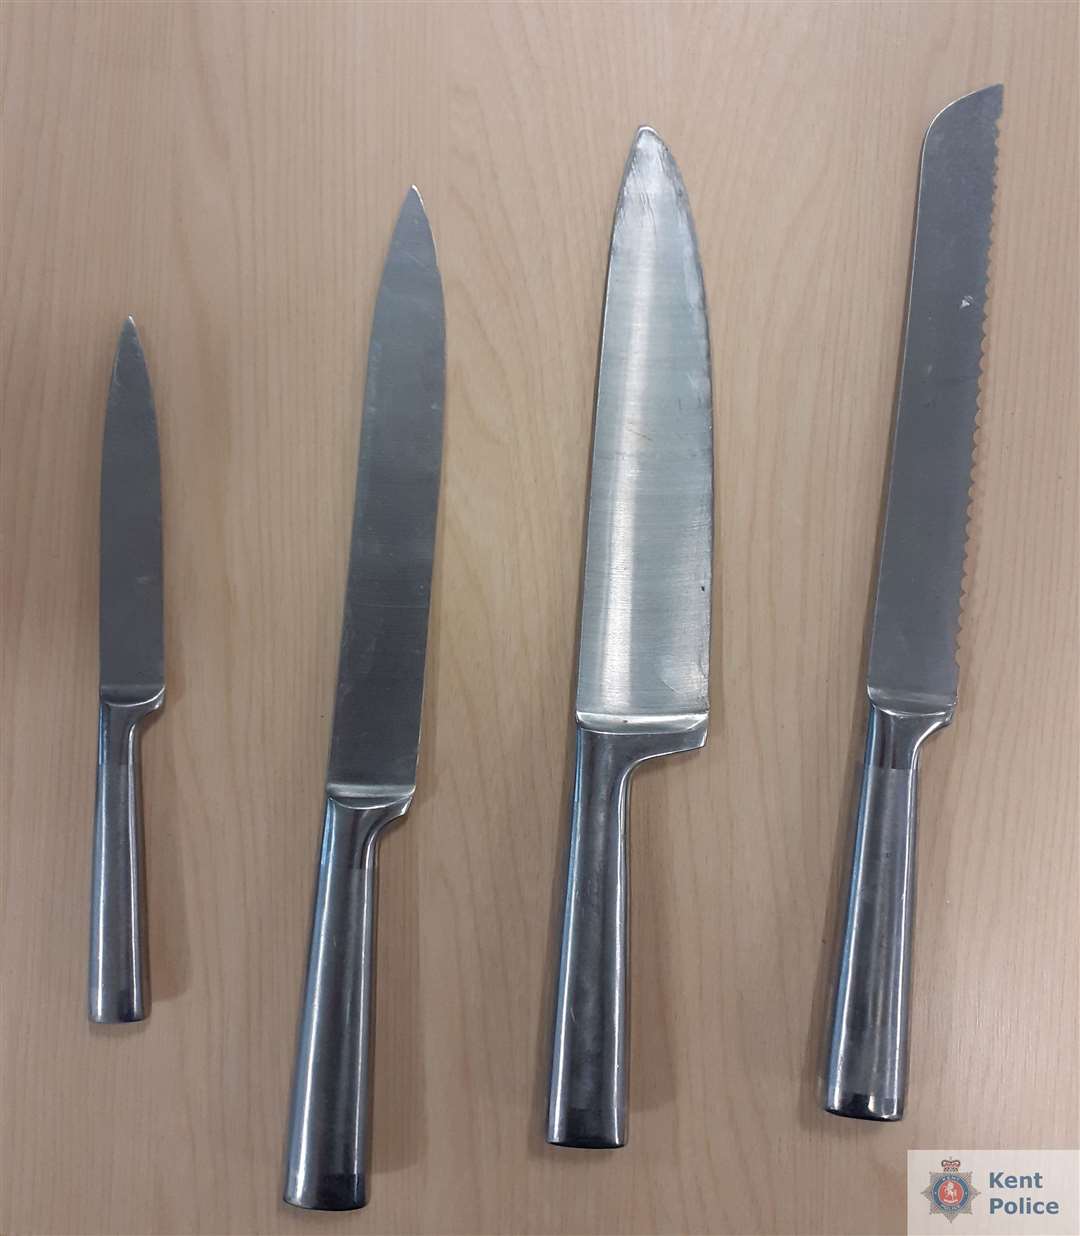 The knives found discarded in Chatham. Picture: Kent Police